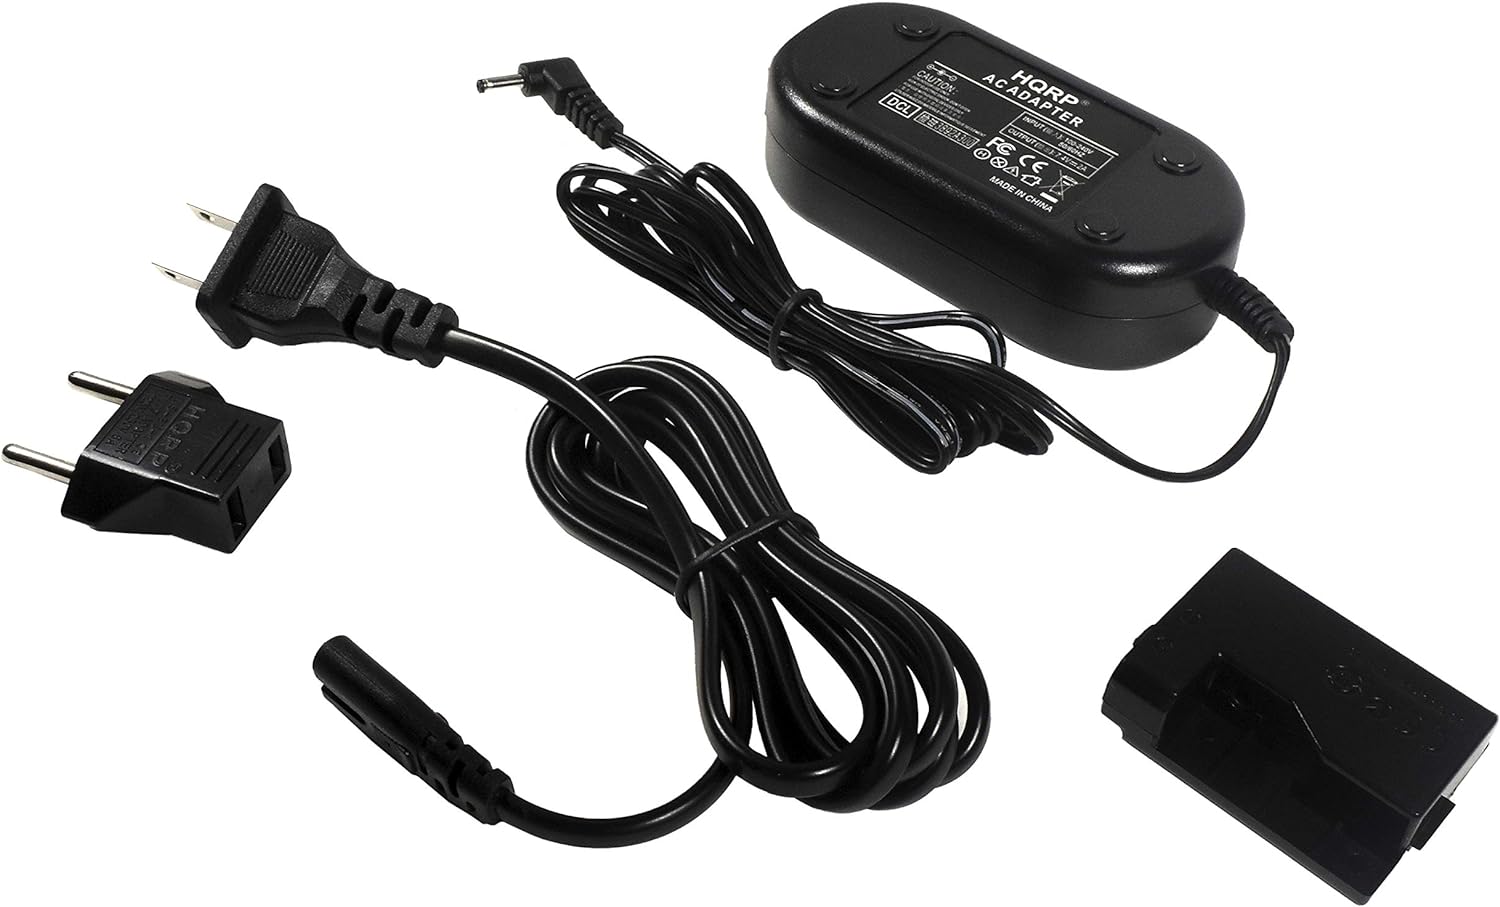 Kit AC Power Adapter Compatible with Canon ACK-E10 ACKE10 EOS T3 T5 T6 T7 T100, 1200D 1100D 1300D 1500D 2000D 4000D Kiss